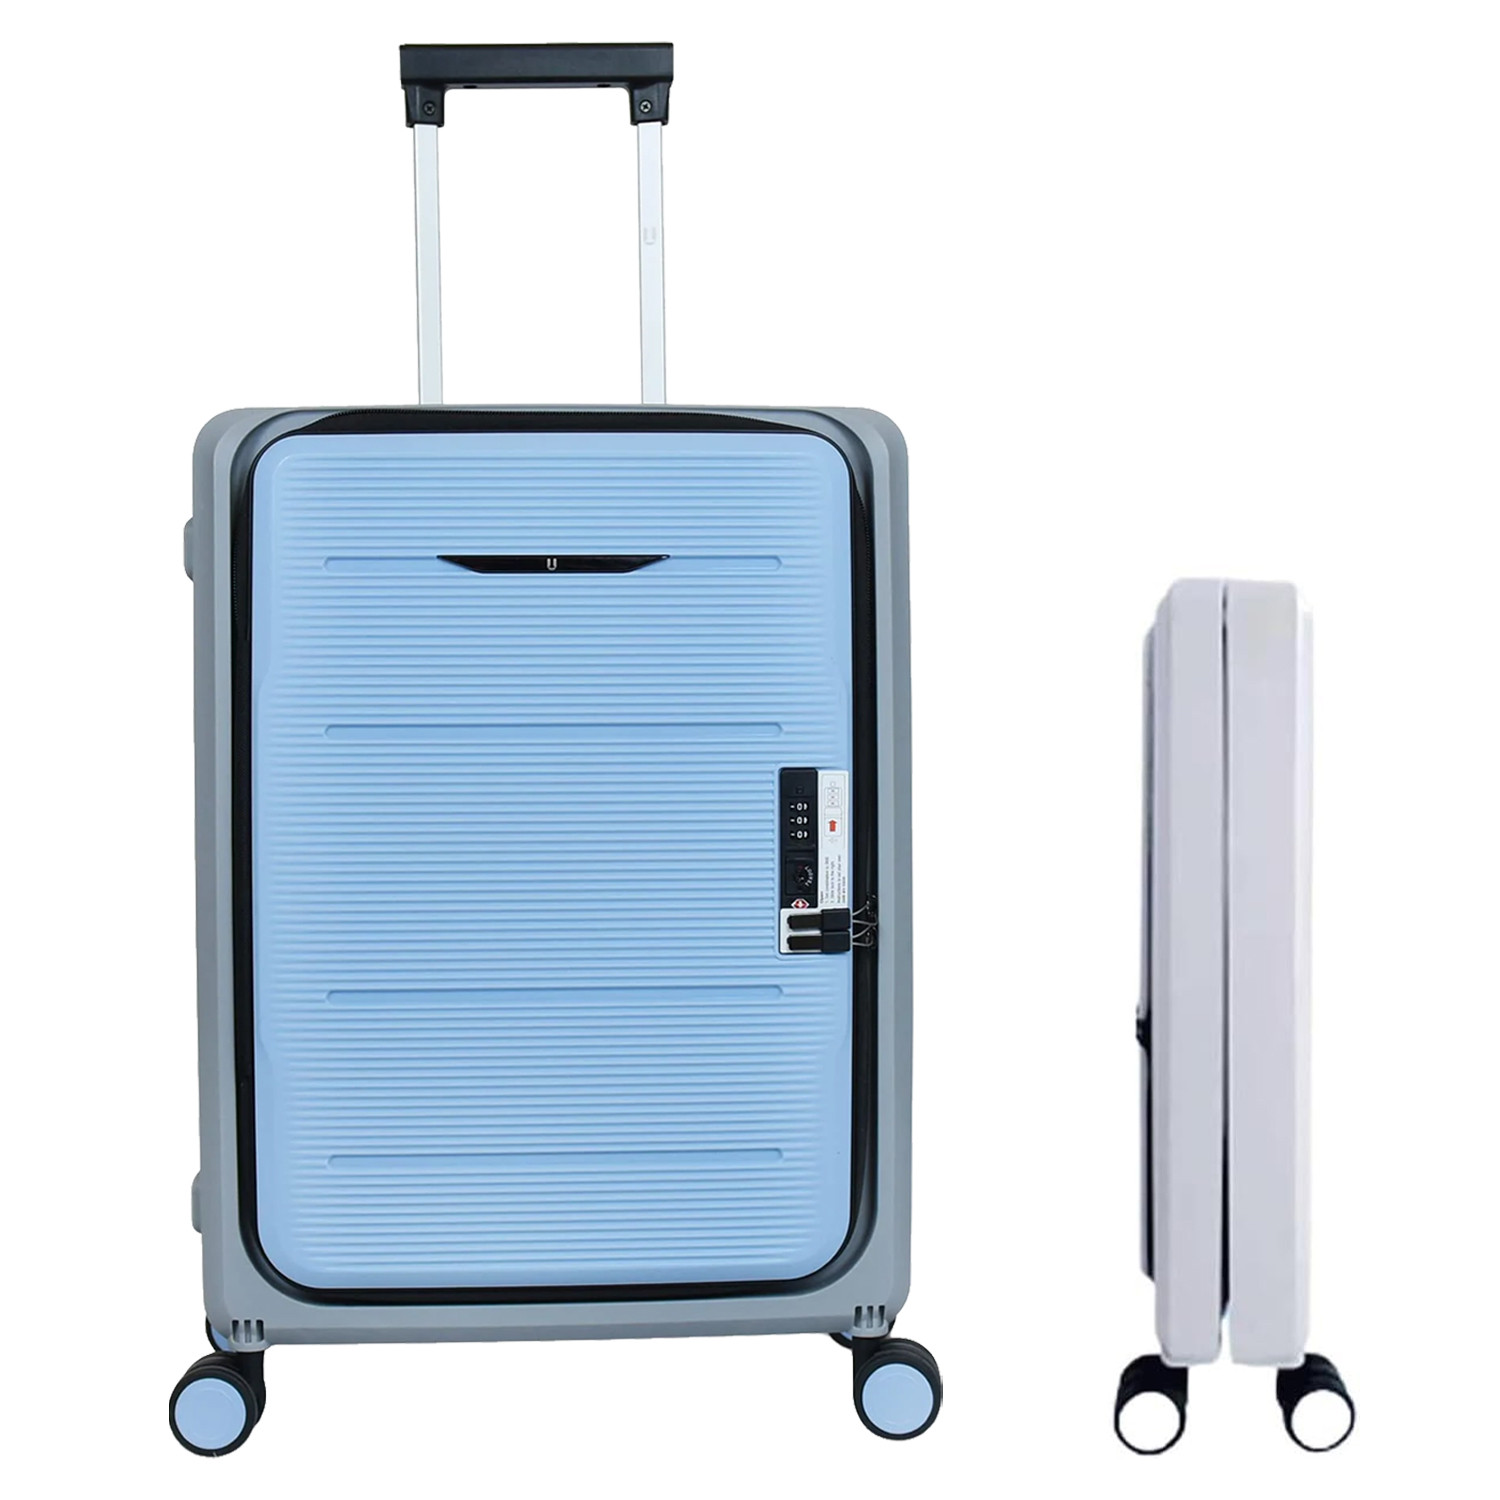 Kuber Industries Luggage Bag | Trolley Bags for Travel | Collapsible Luggage Bag | Travelling Bag | Trolley Bags for Suitcase | Lightweight Luggage Bag | 20BG-24BG Inch | Blue & Gray